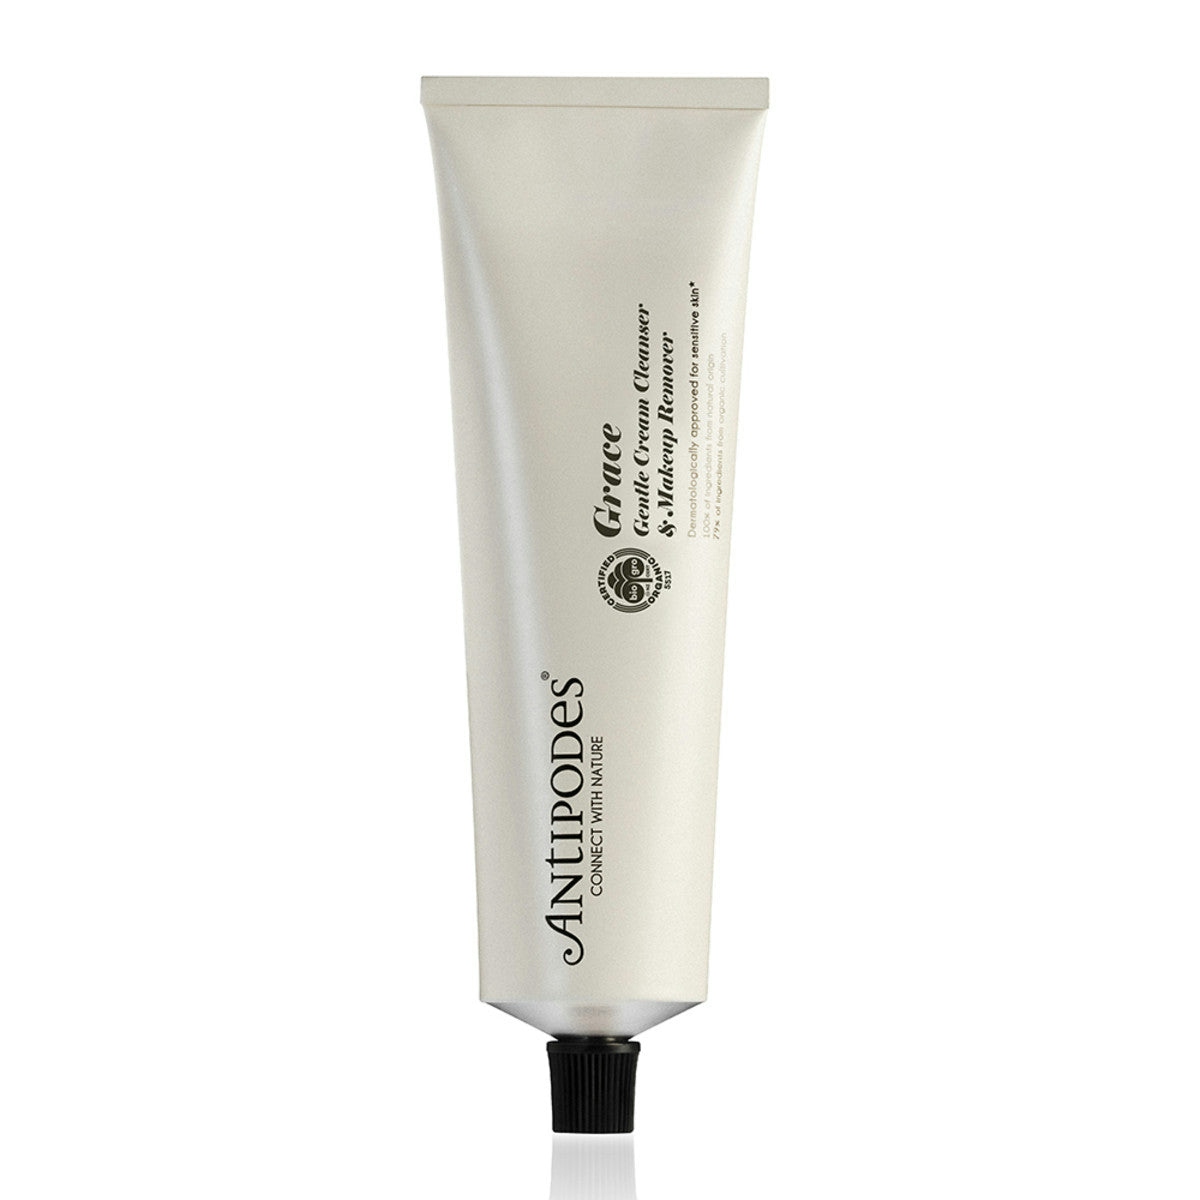 image of Antipodes Organic Grace Gentle Cream Cleanser & Makeup Remover 120ml on white background 